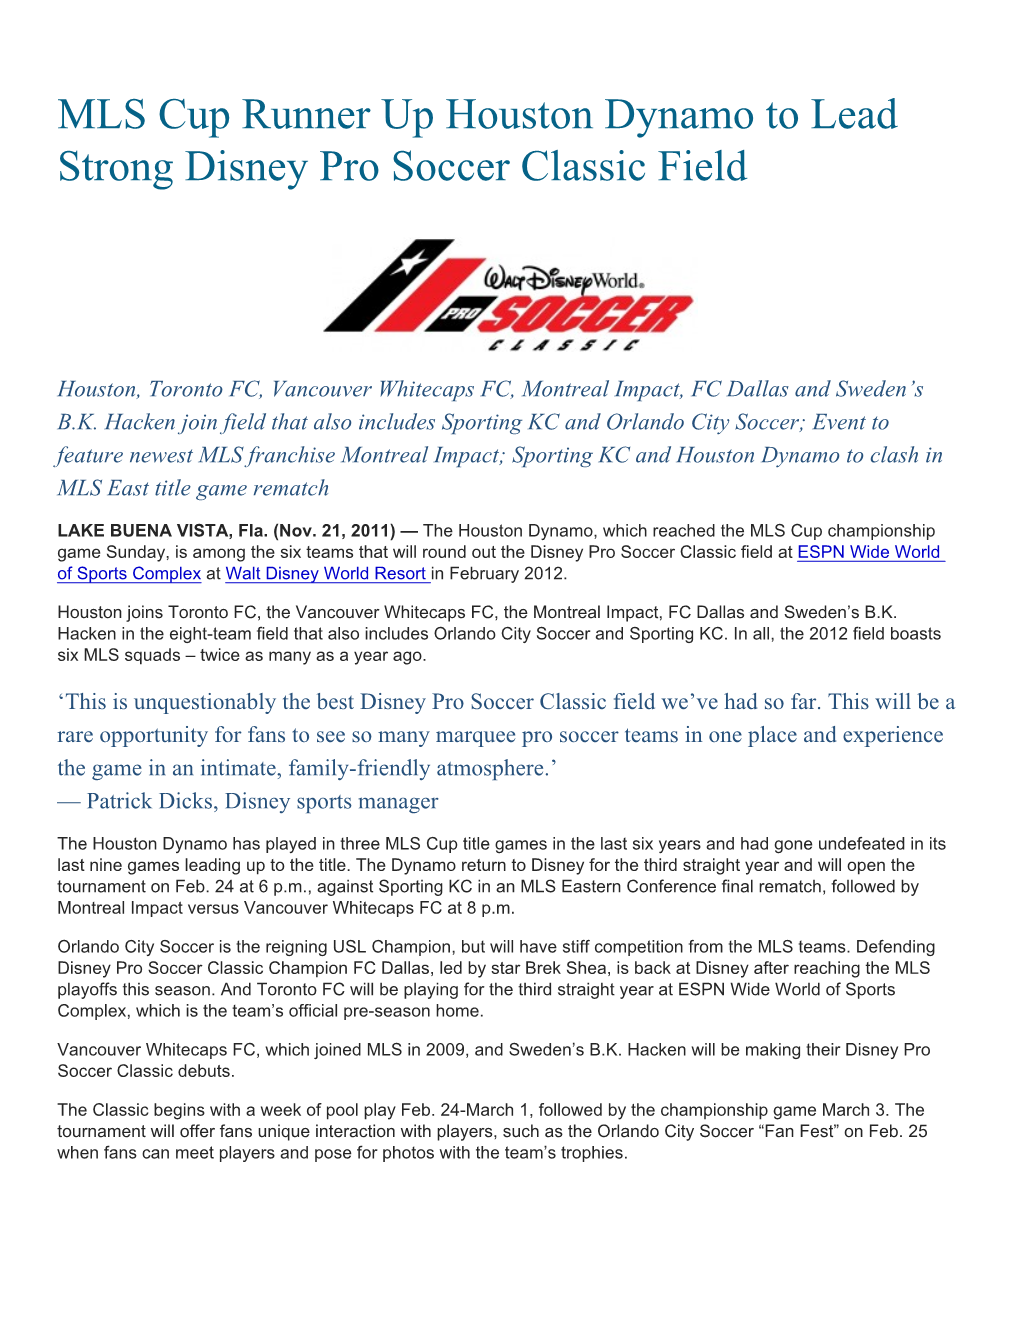 MLS Cup Runner up Houston Dynamo to Lead Strong Disney Pro Soccer Classic Field